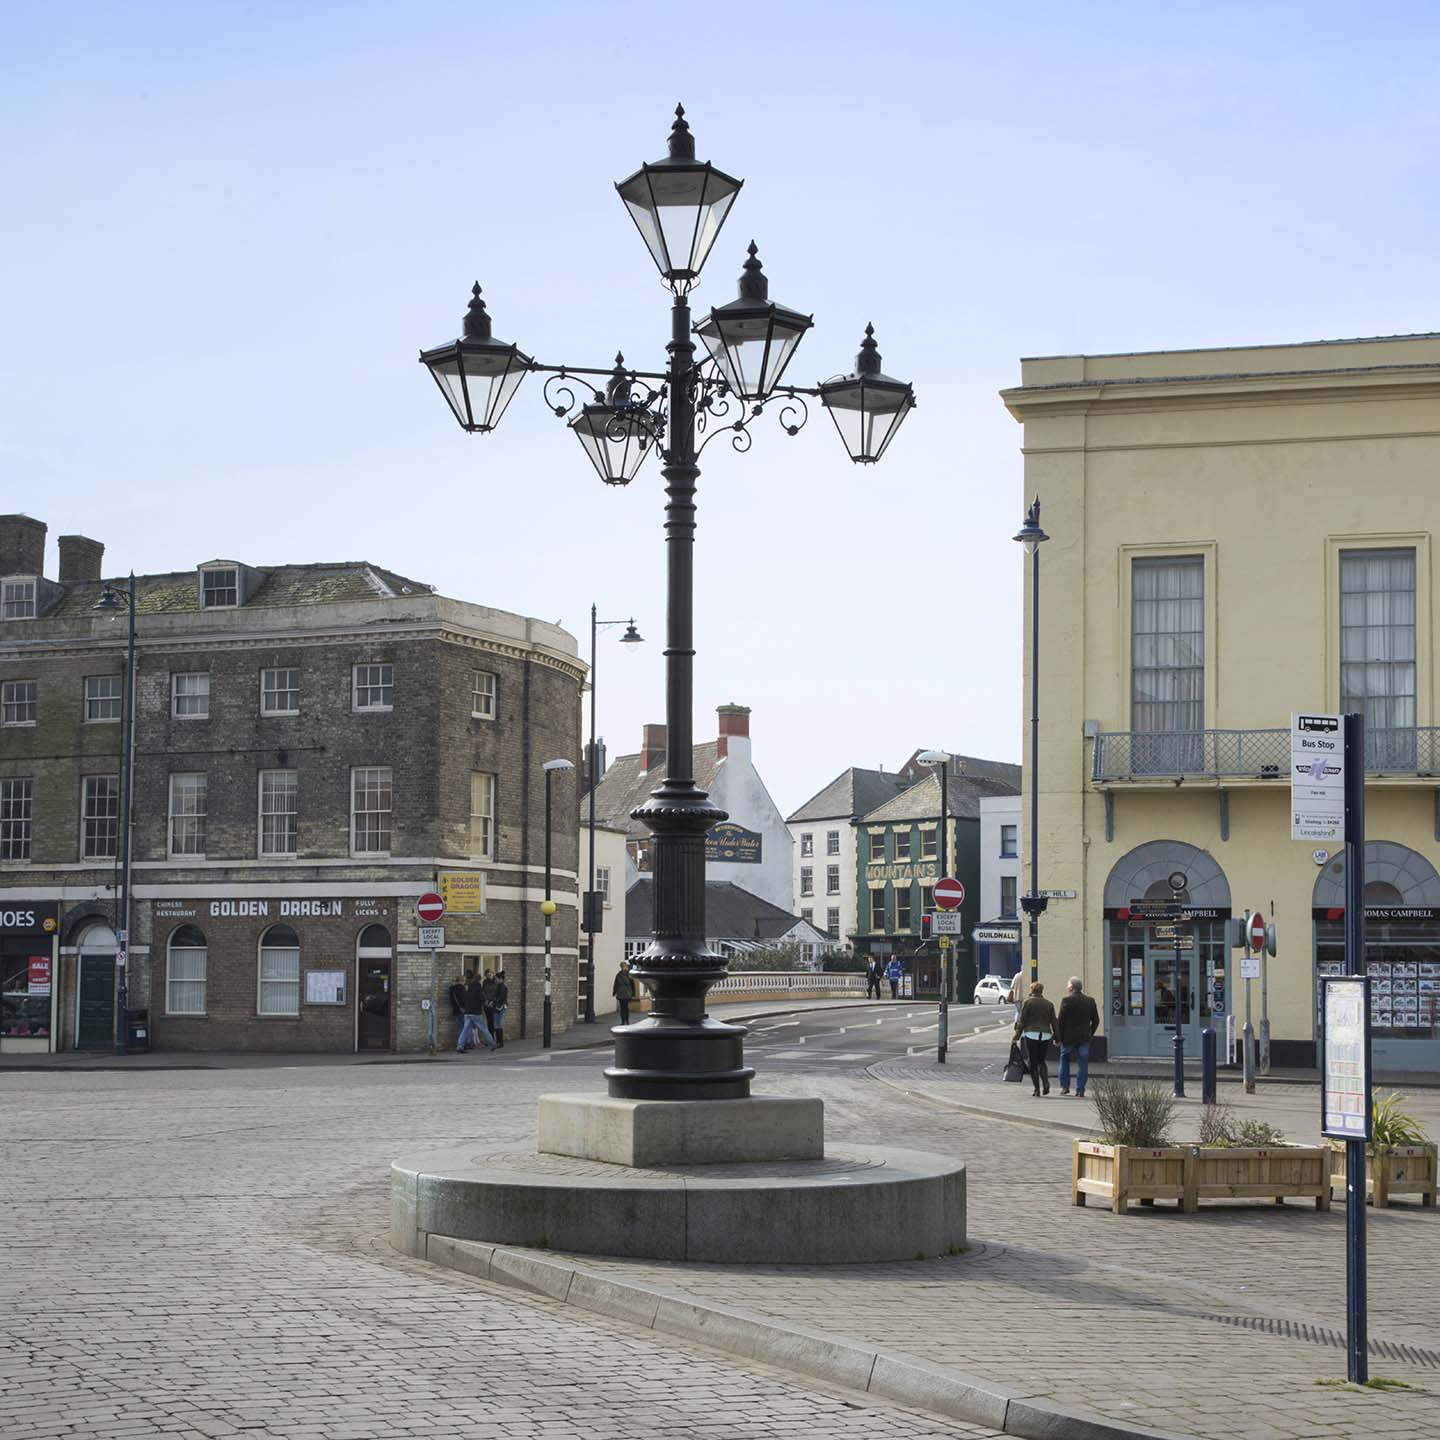 The Five Lamps and the repaved Market Place